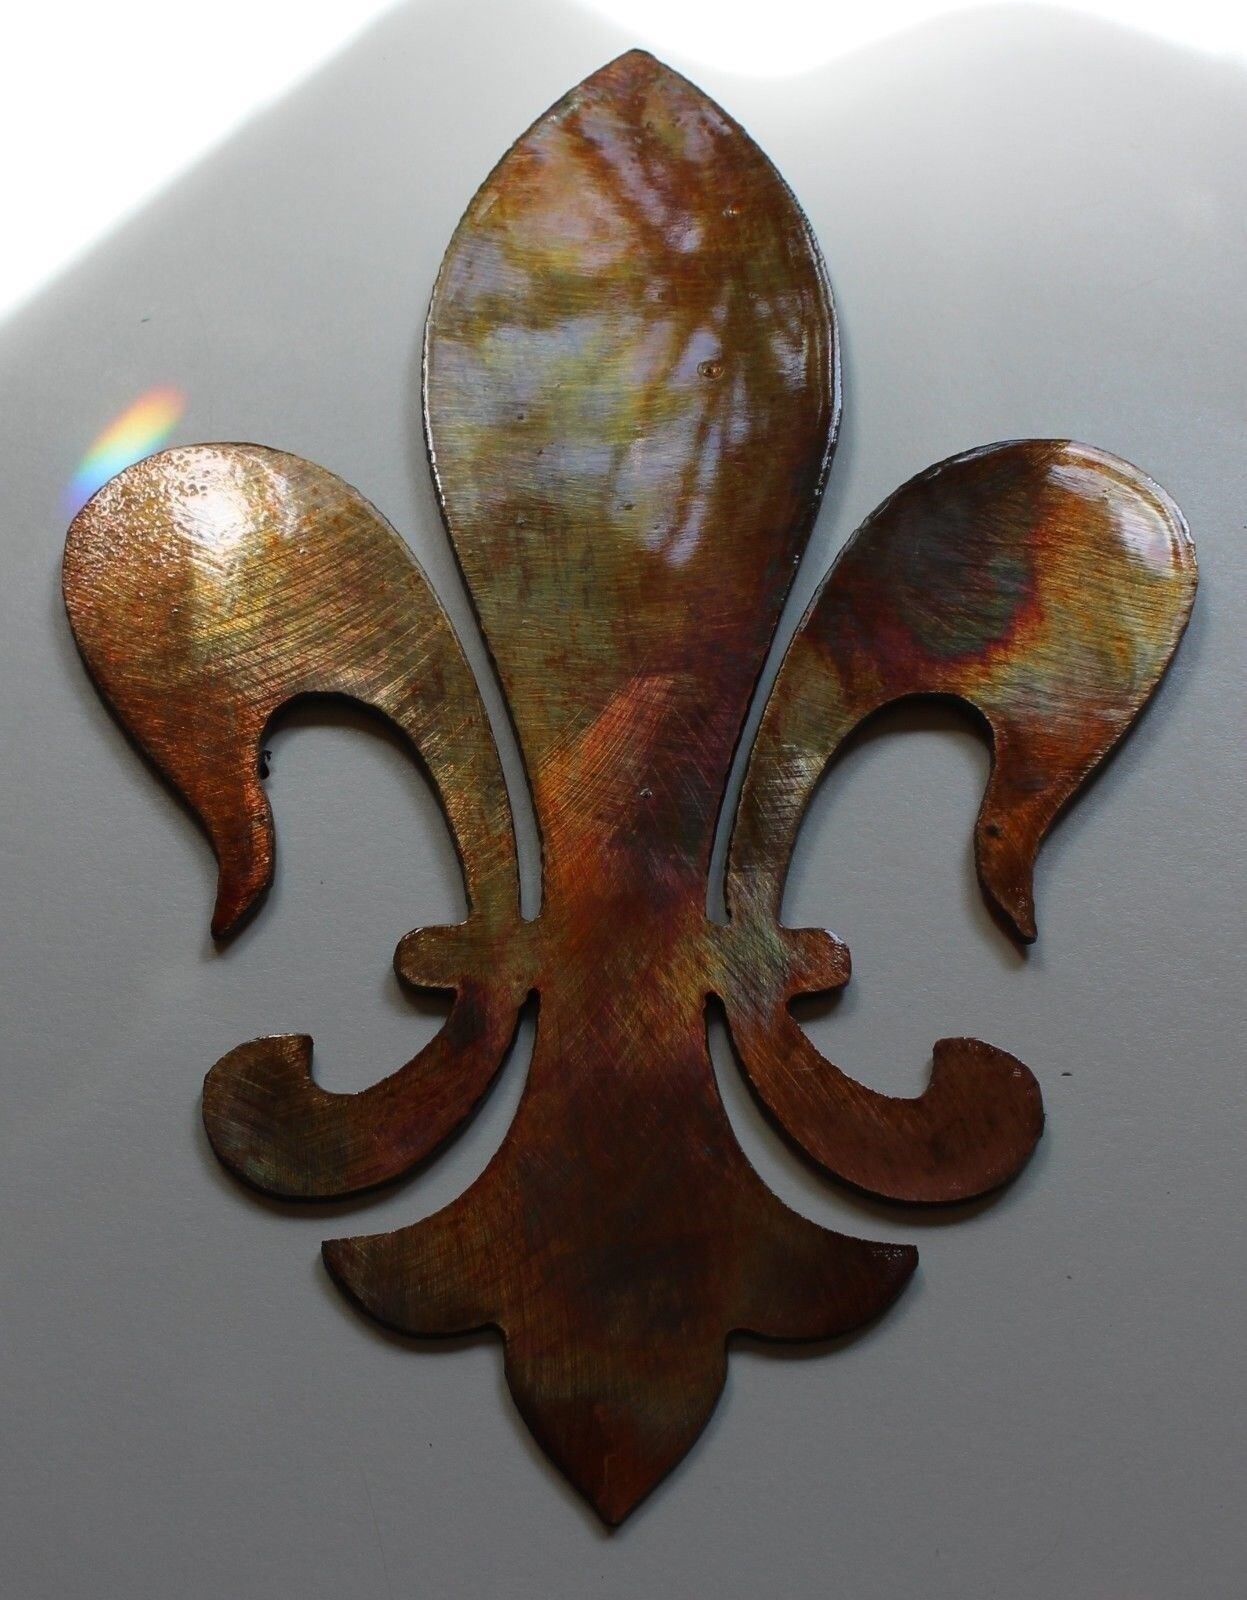 Primary image for Fleur de Lis Copper/Bronze Plated Metal Wall Decor approx 8" tall